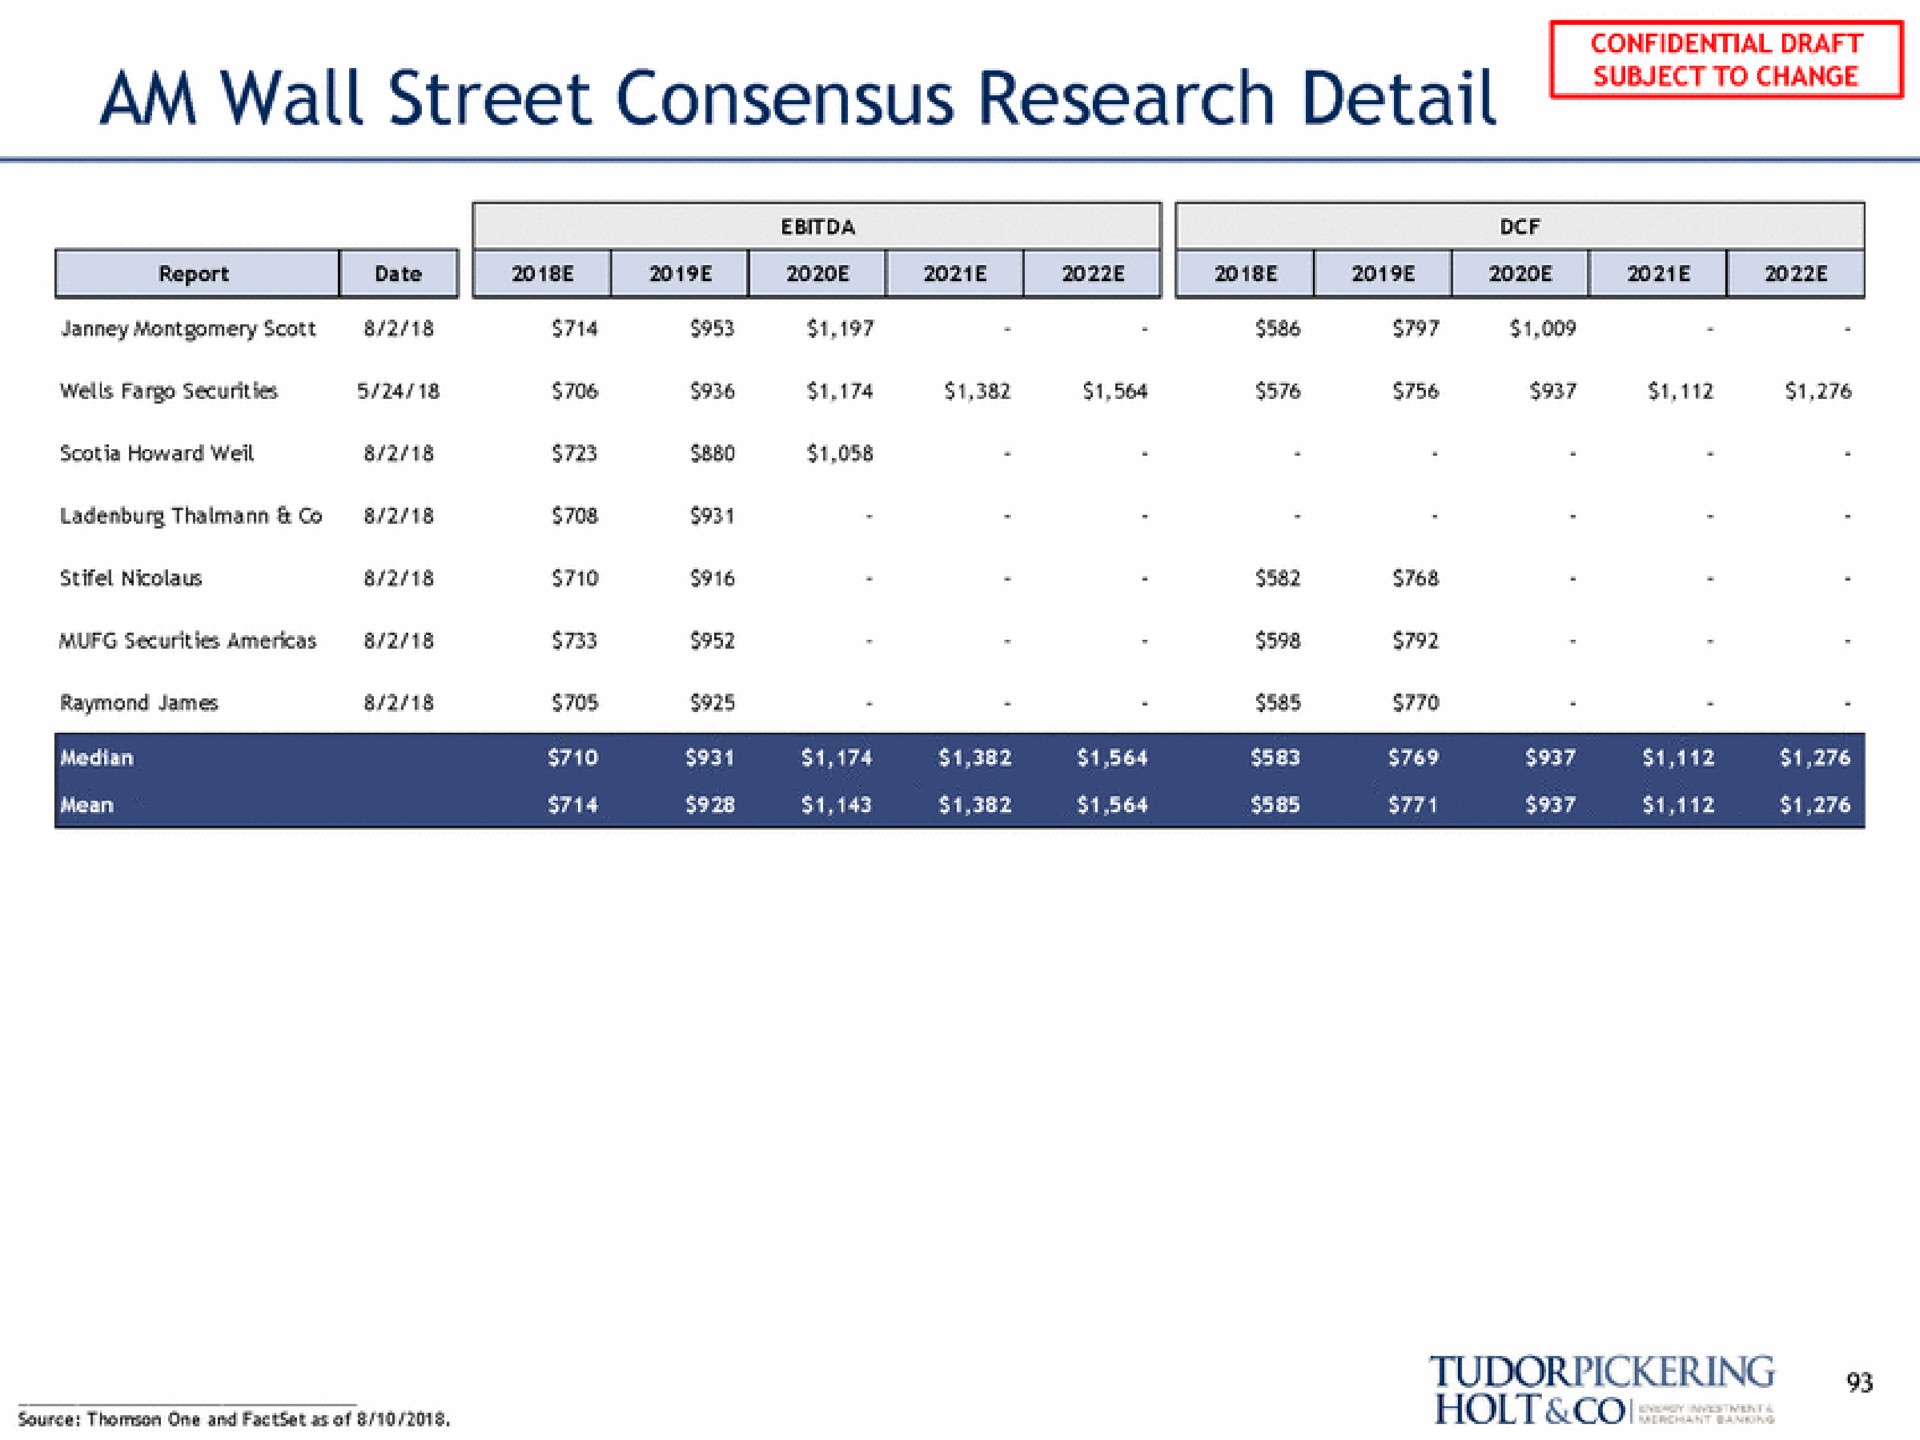 am wall street consensus research detail | Tudor, Pickering, Holt & Co